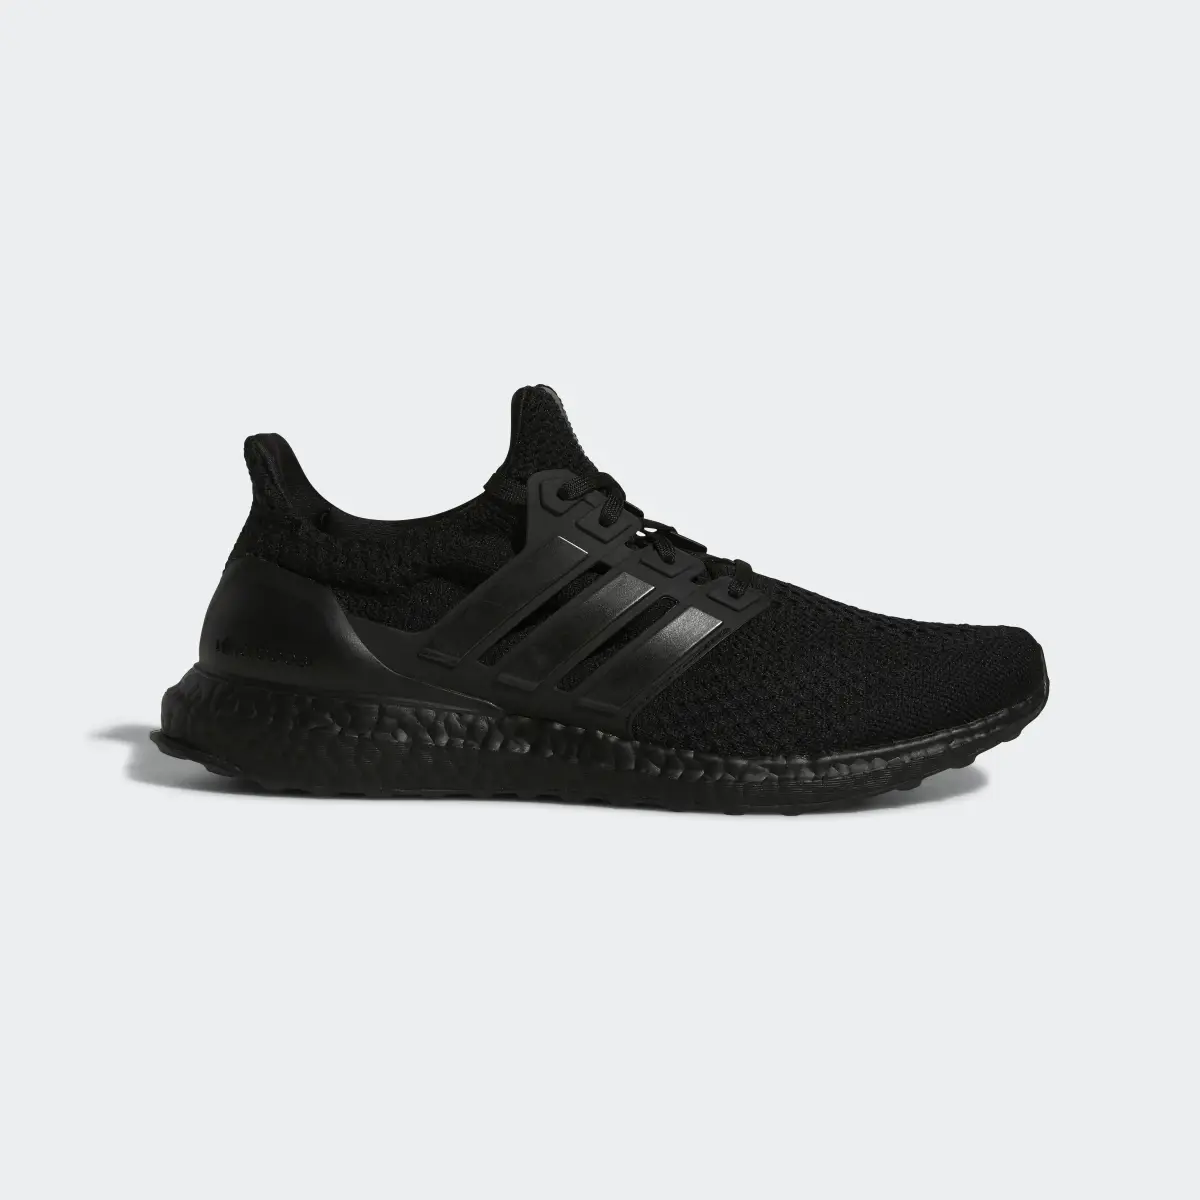 Adidas Ultraboost 5 DNA Running Lifestyle Shoes. 2